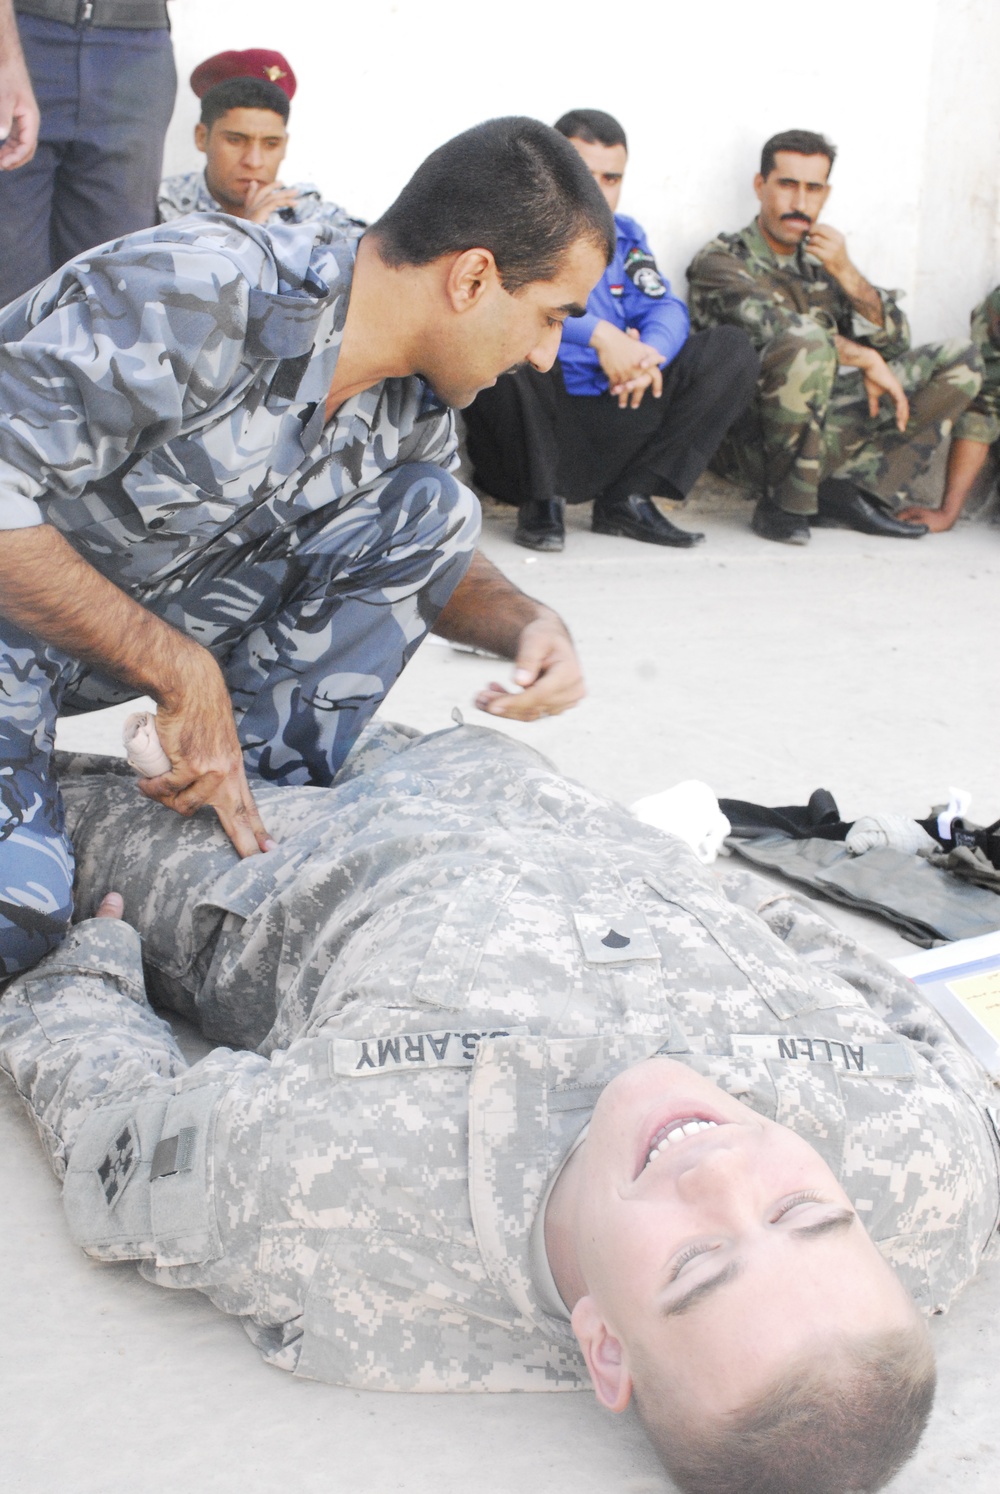 Iraqis, US Army train together to patch up wounds